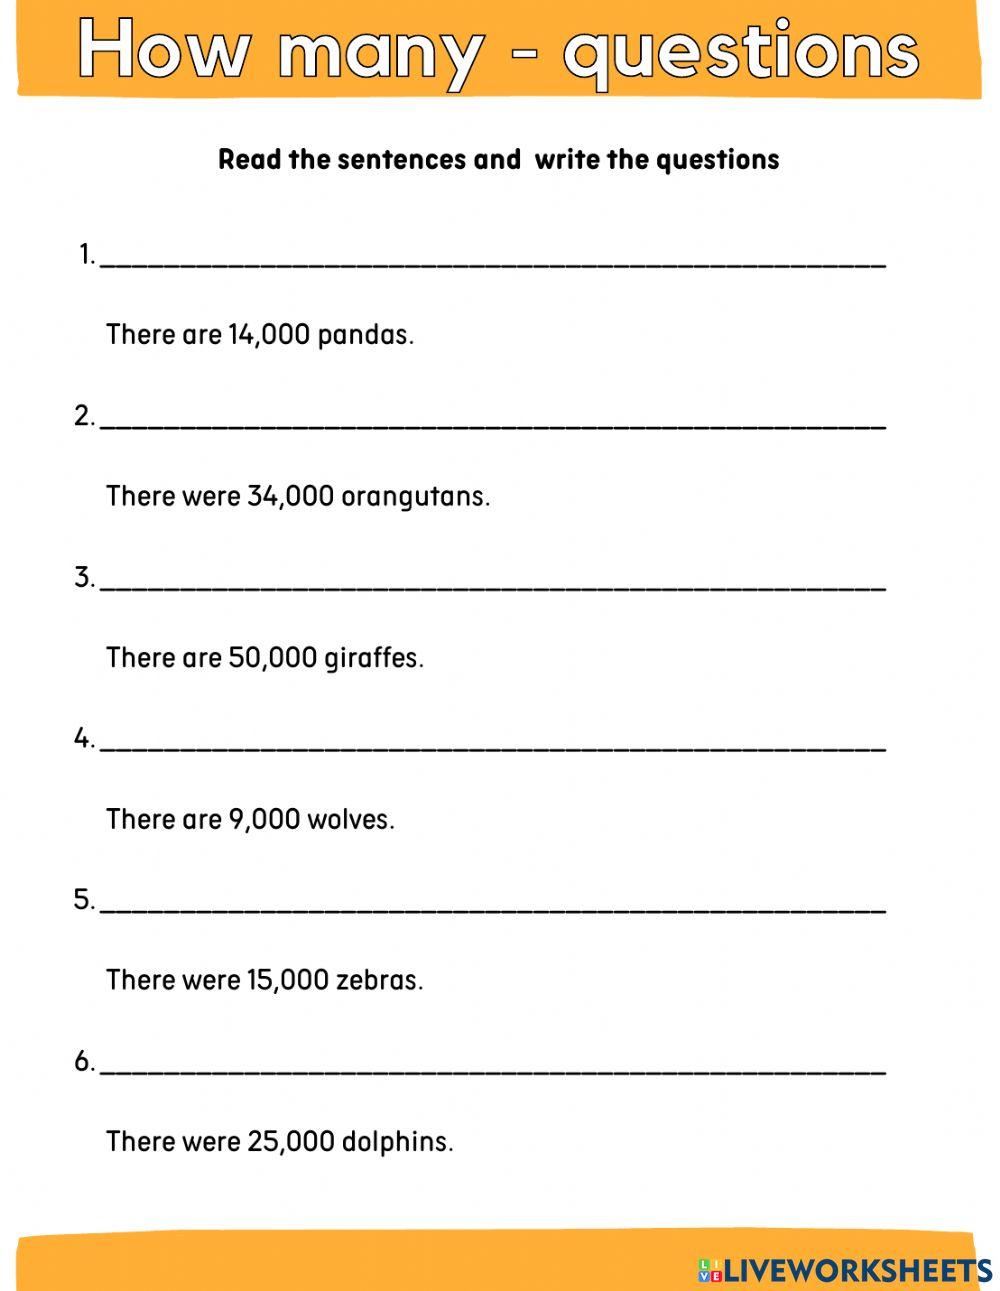 How many - Write the questions